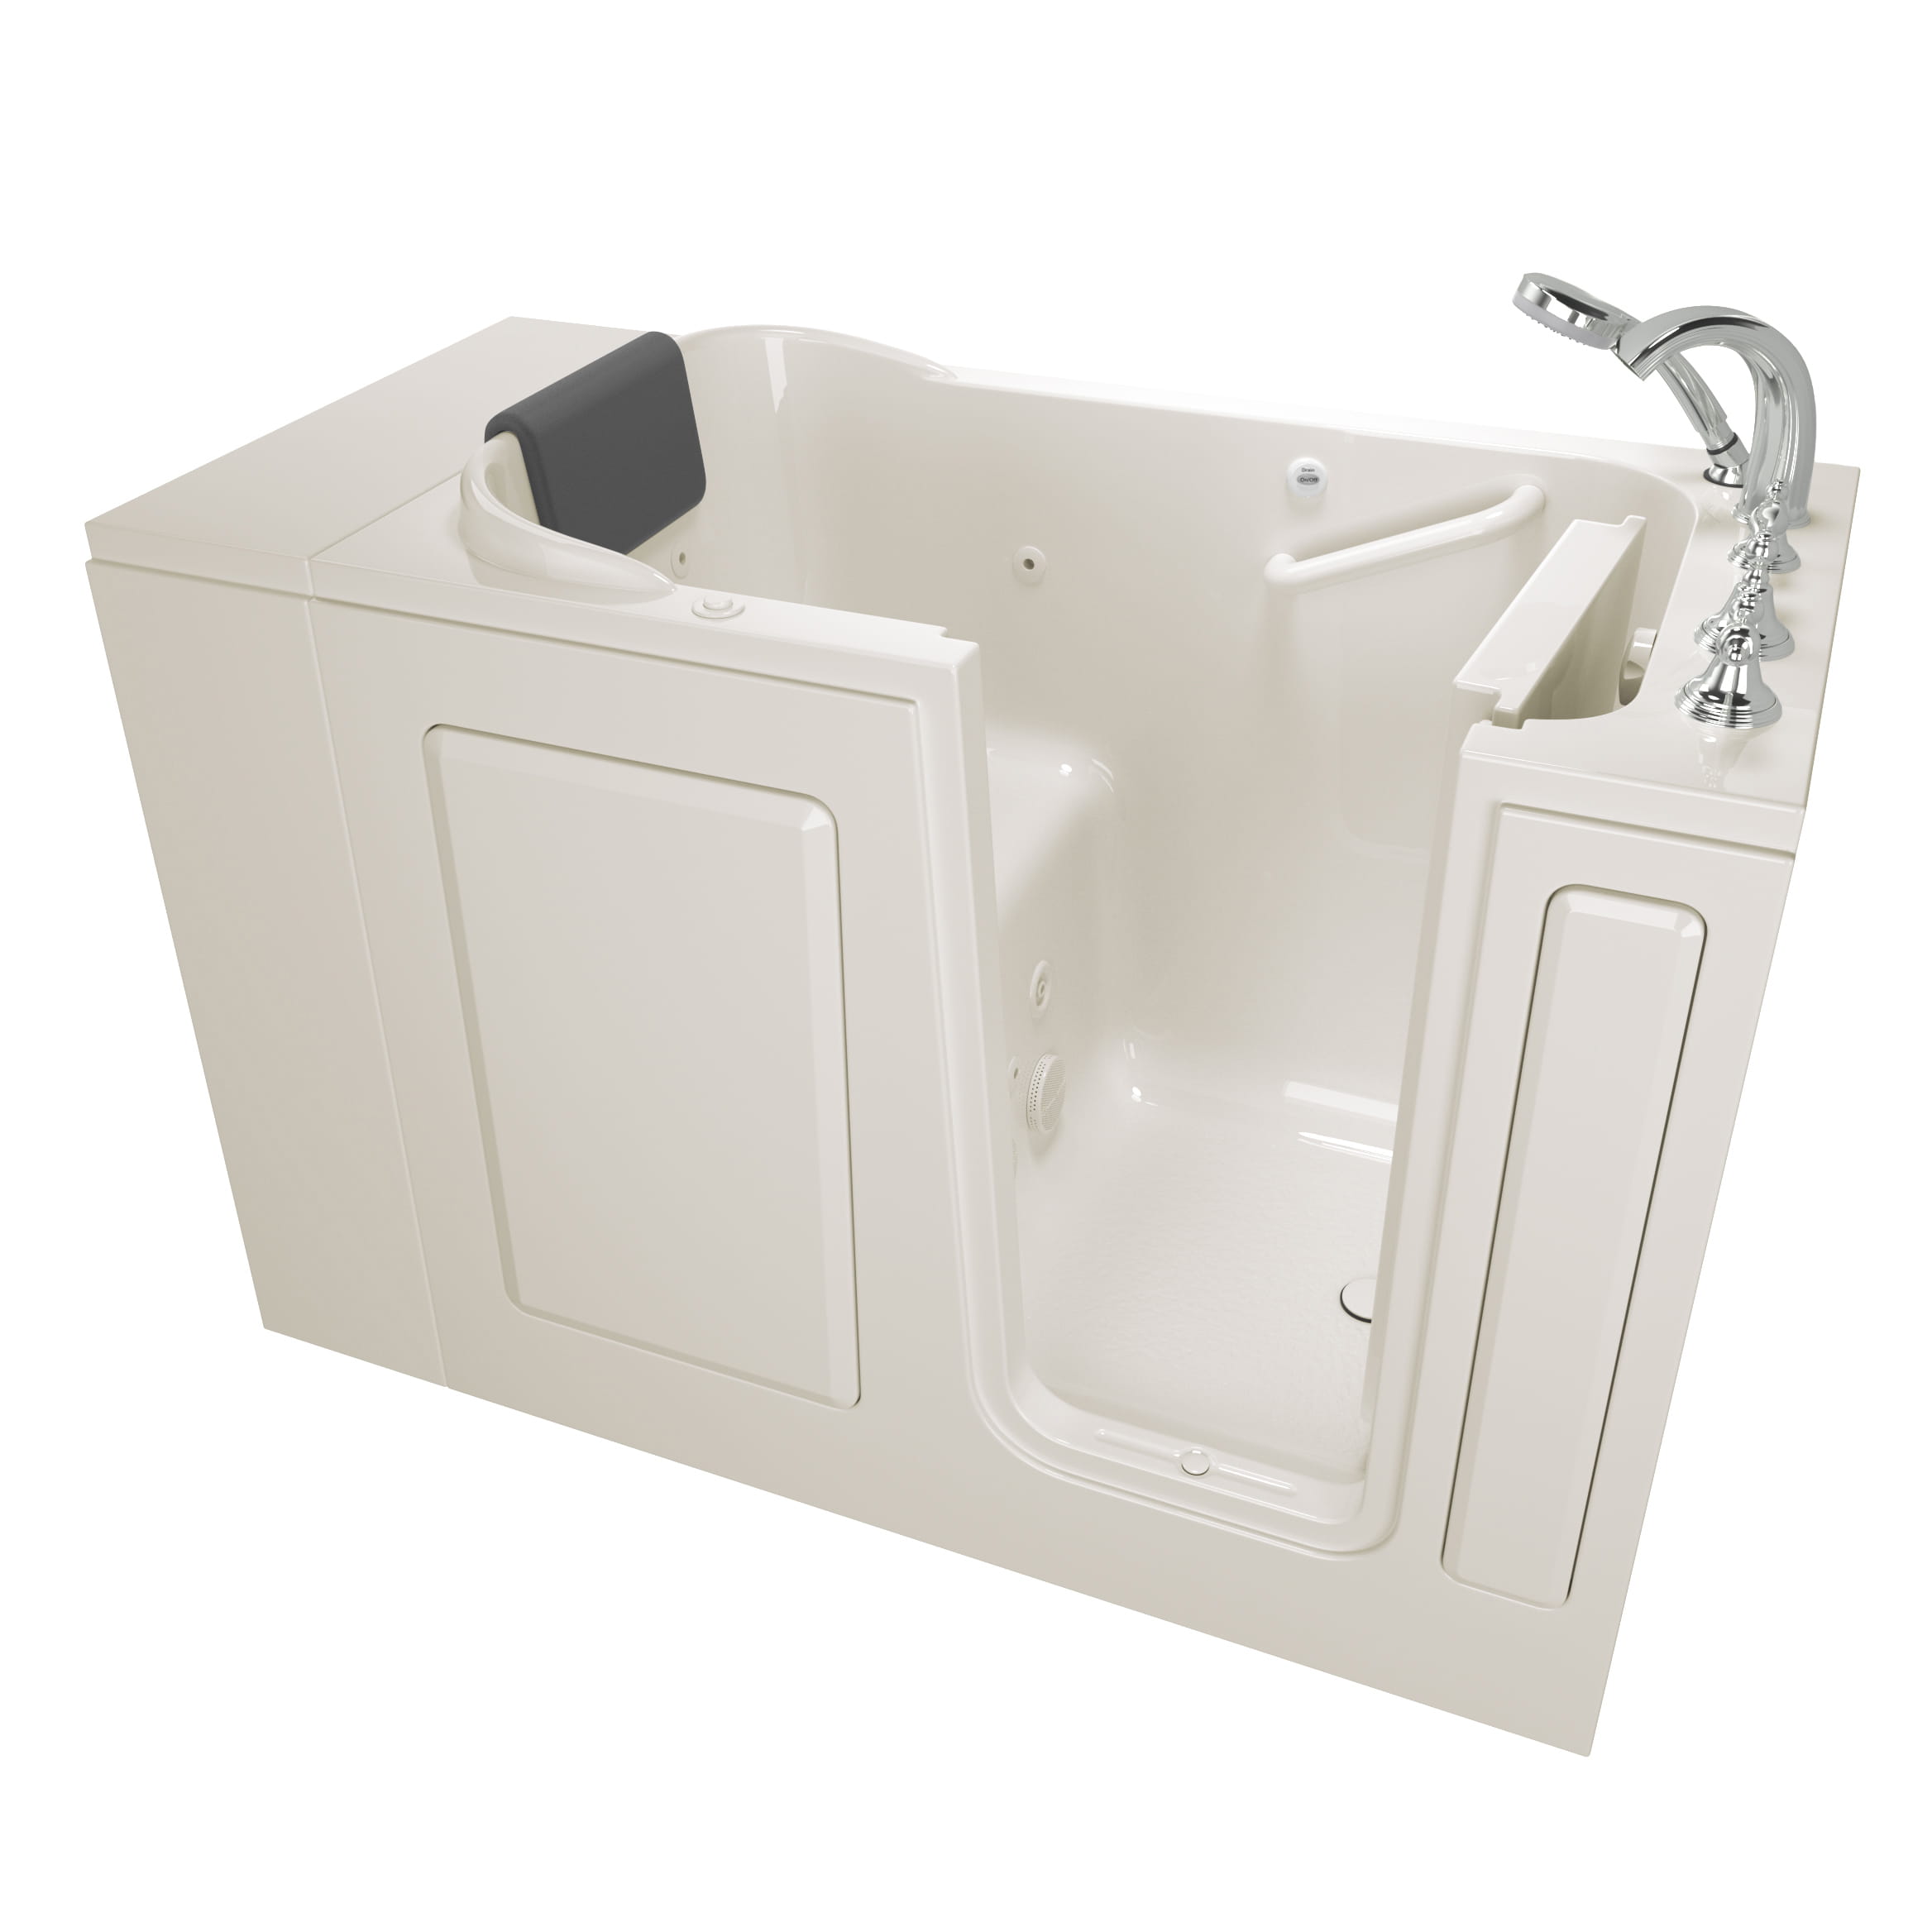 Gelcoat Premium Series 28 x 48-Inch Walk-in Tub With Whirlpool System - Right-Hand Drain With Faucet